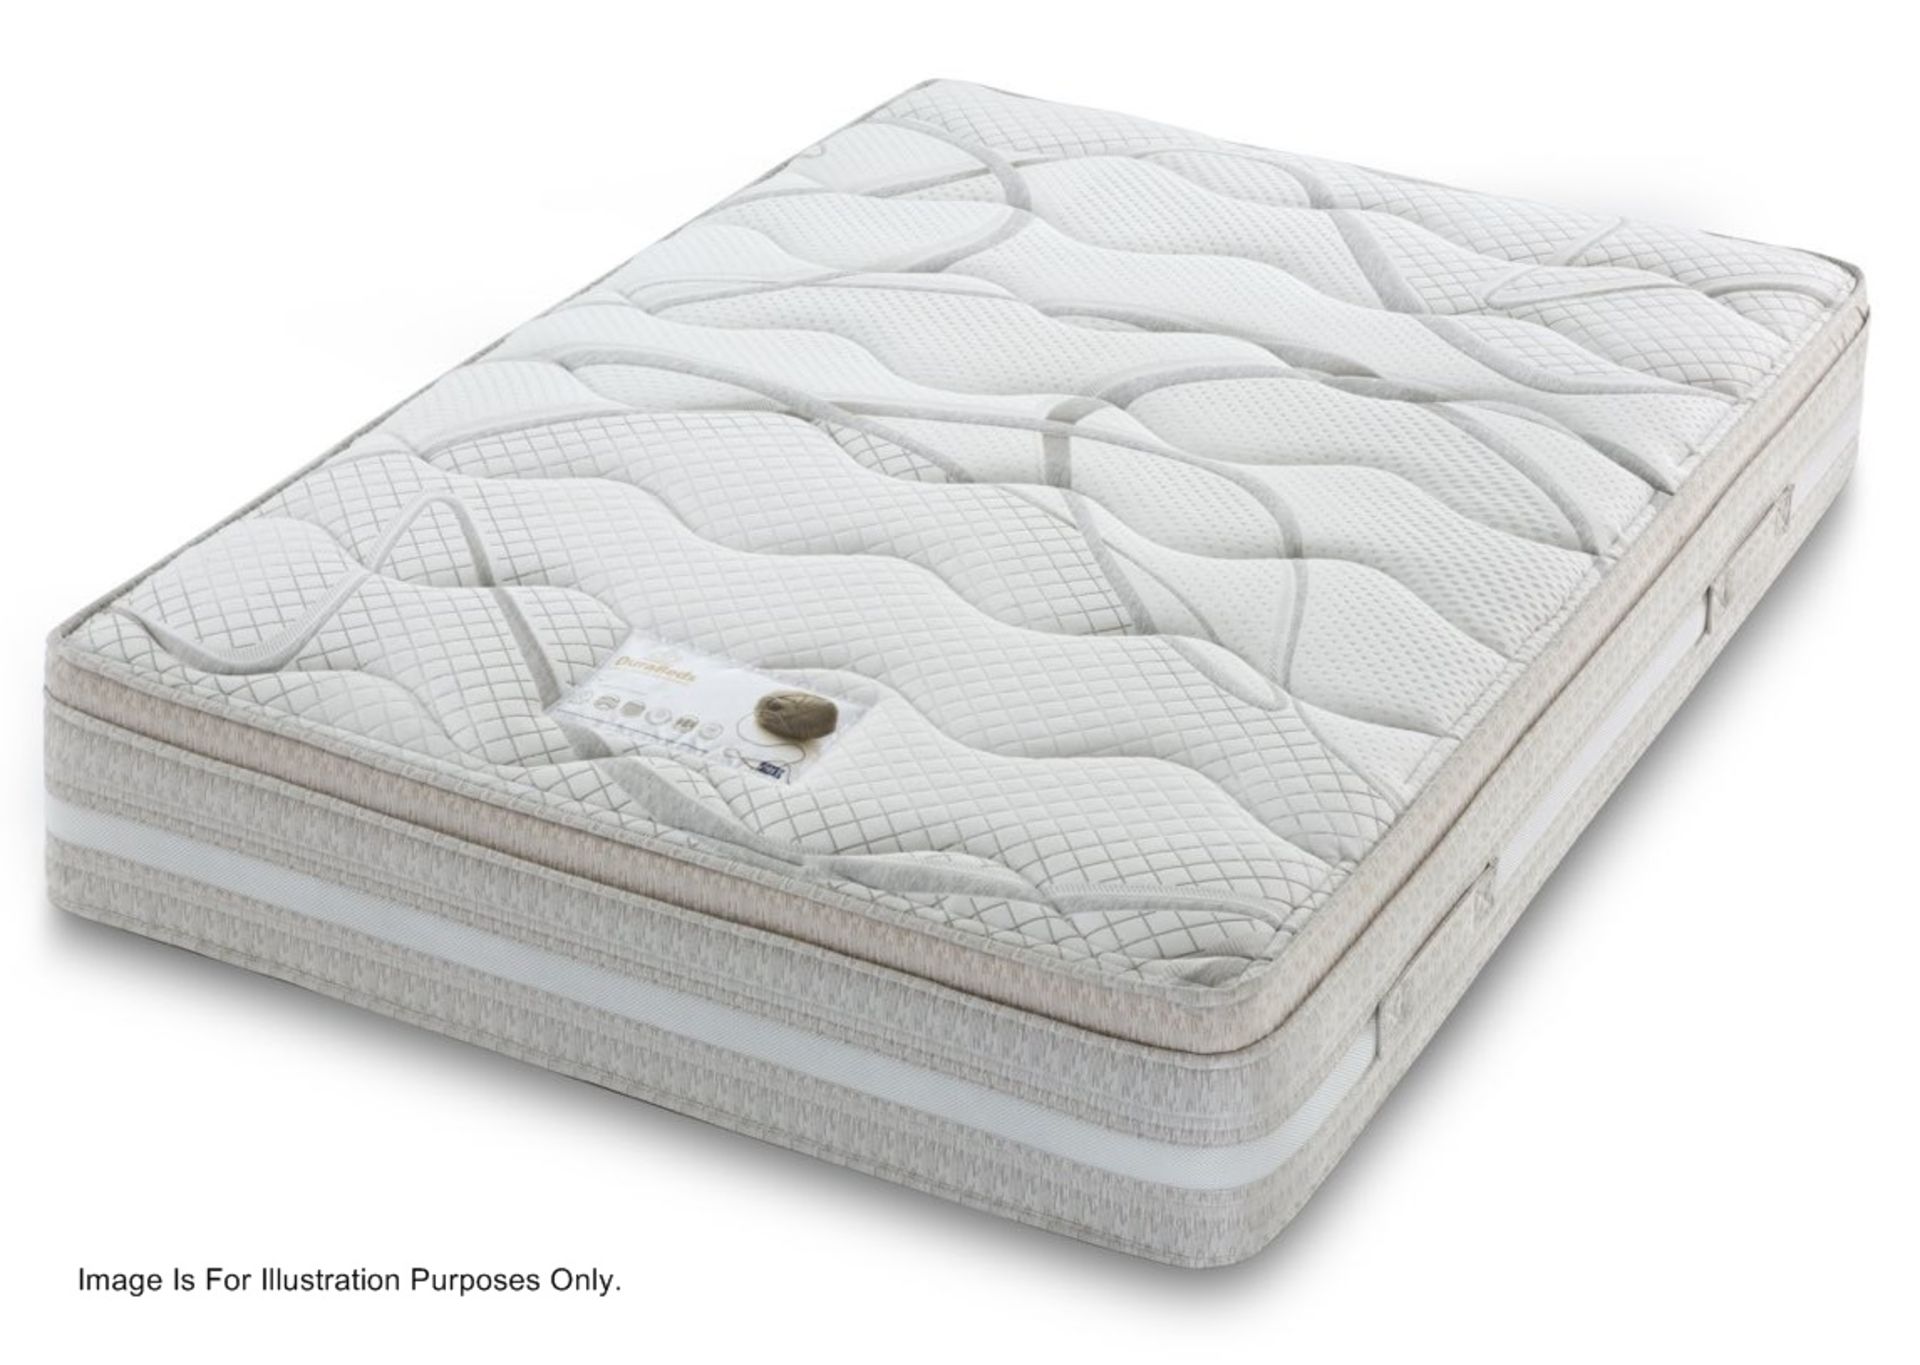 1 x Super King Size Open Coil Mattress With Cushion Top And Airflow Features - Medium Firmness -